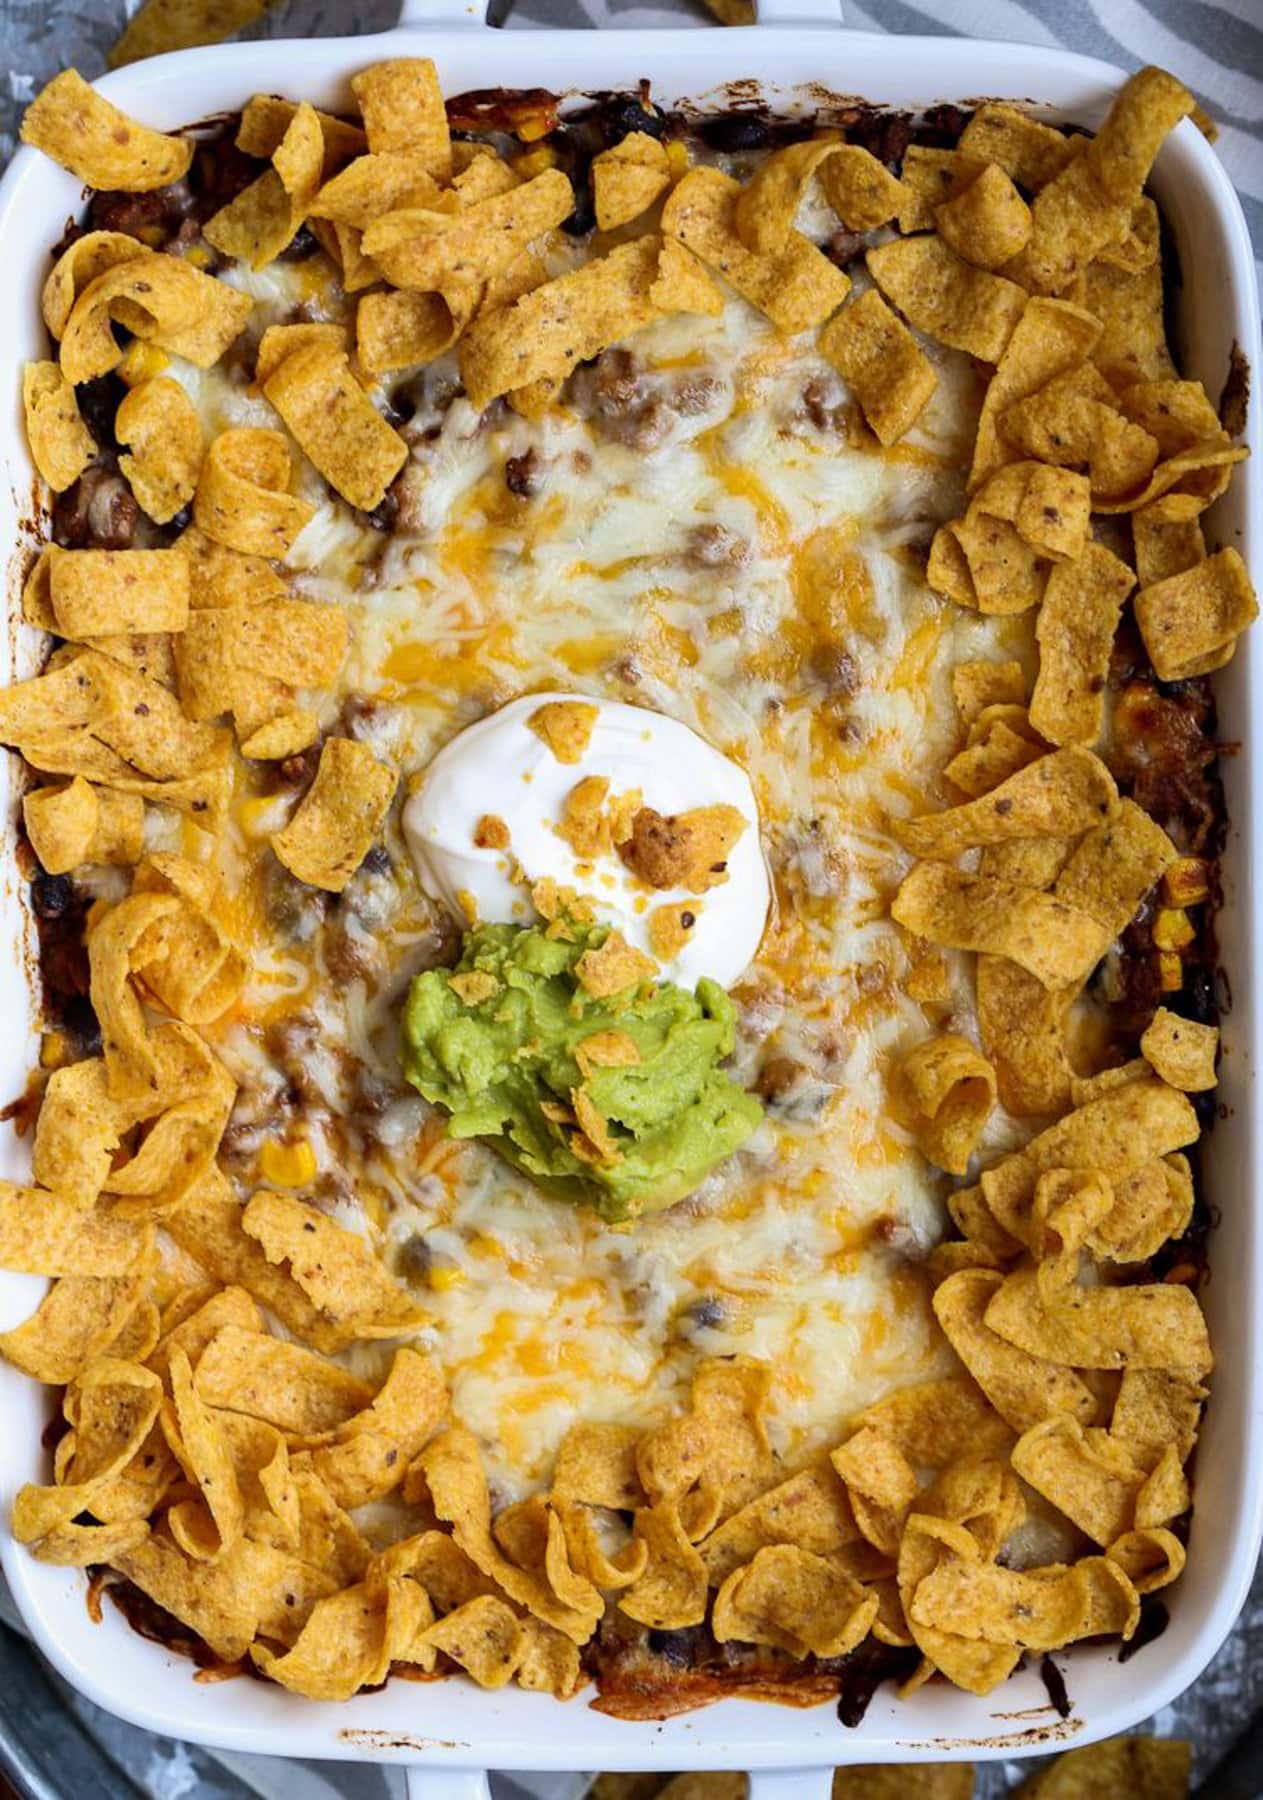 Frito casserole served out of a 9x13 pan